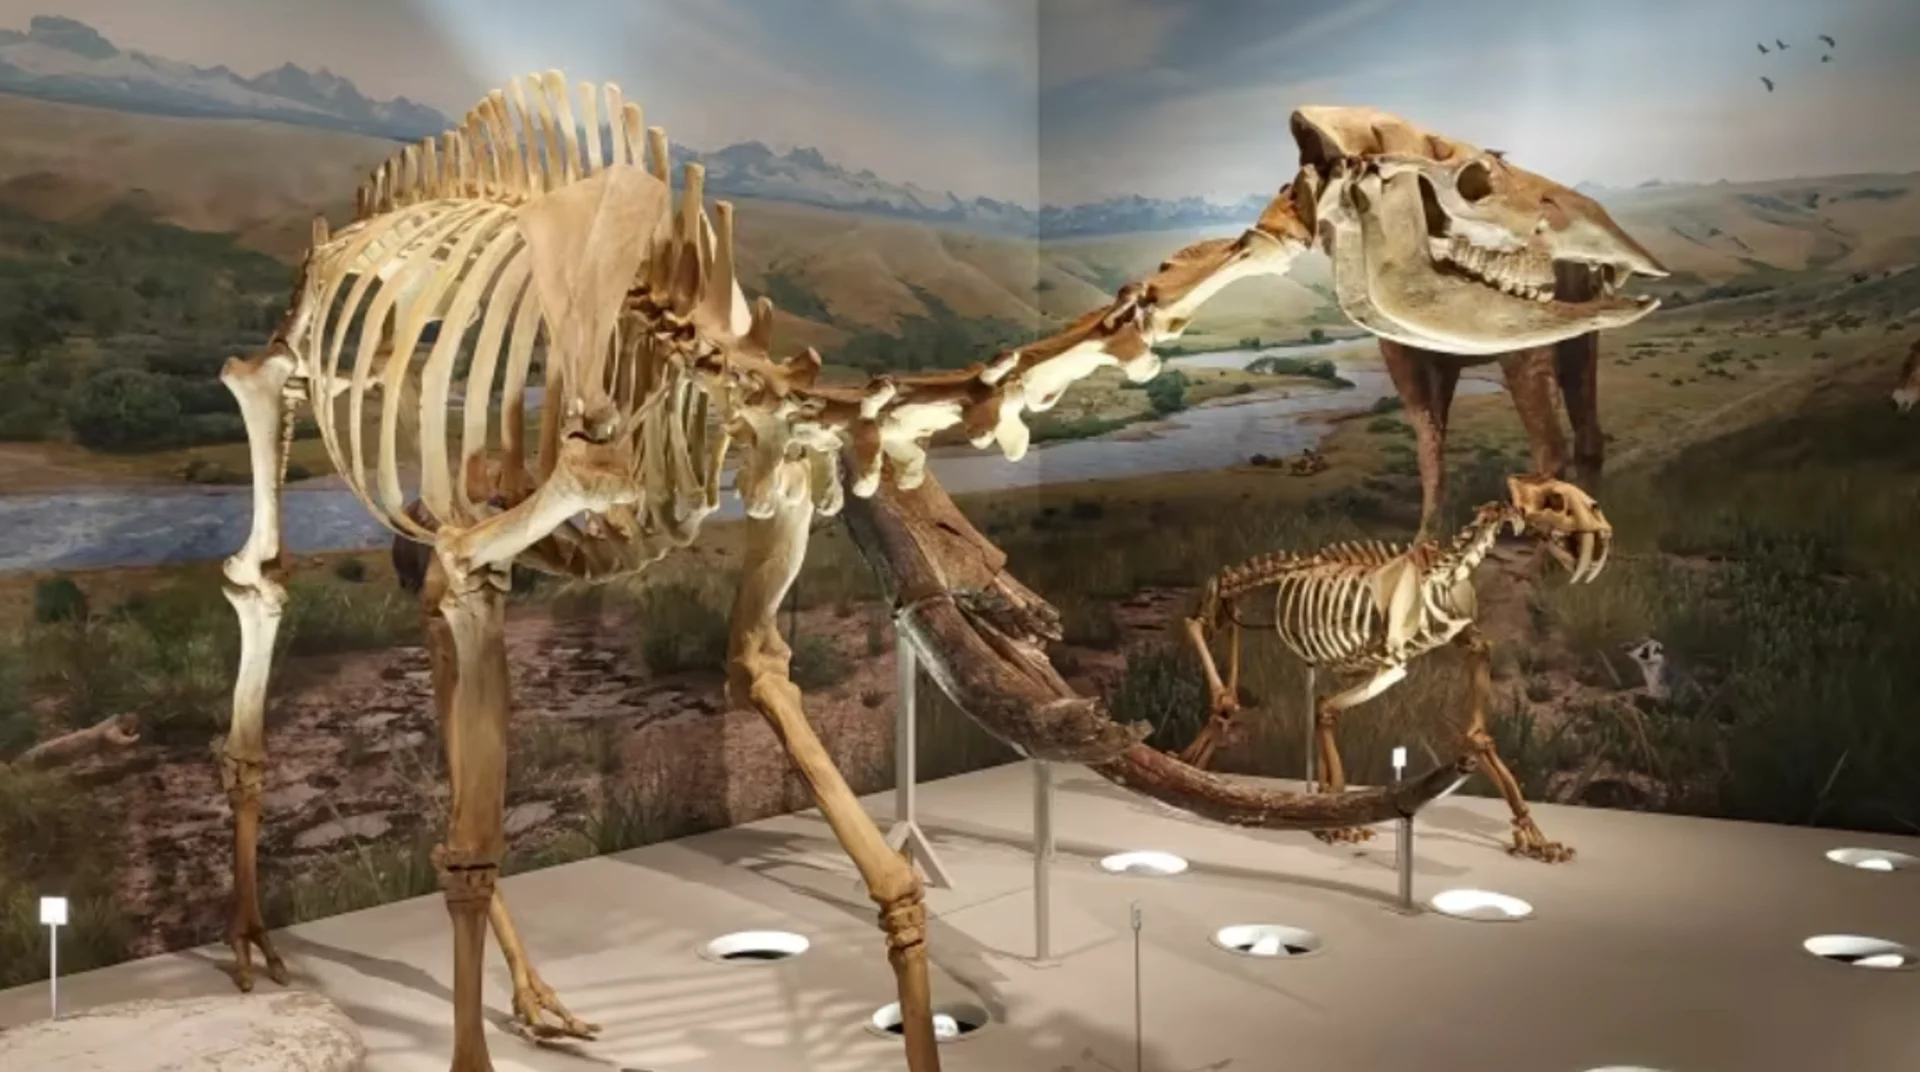 Alberta paleontologists studying rare horse and camel fossils